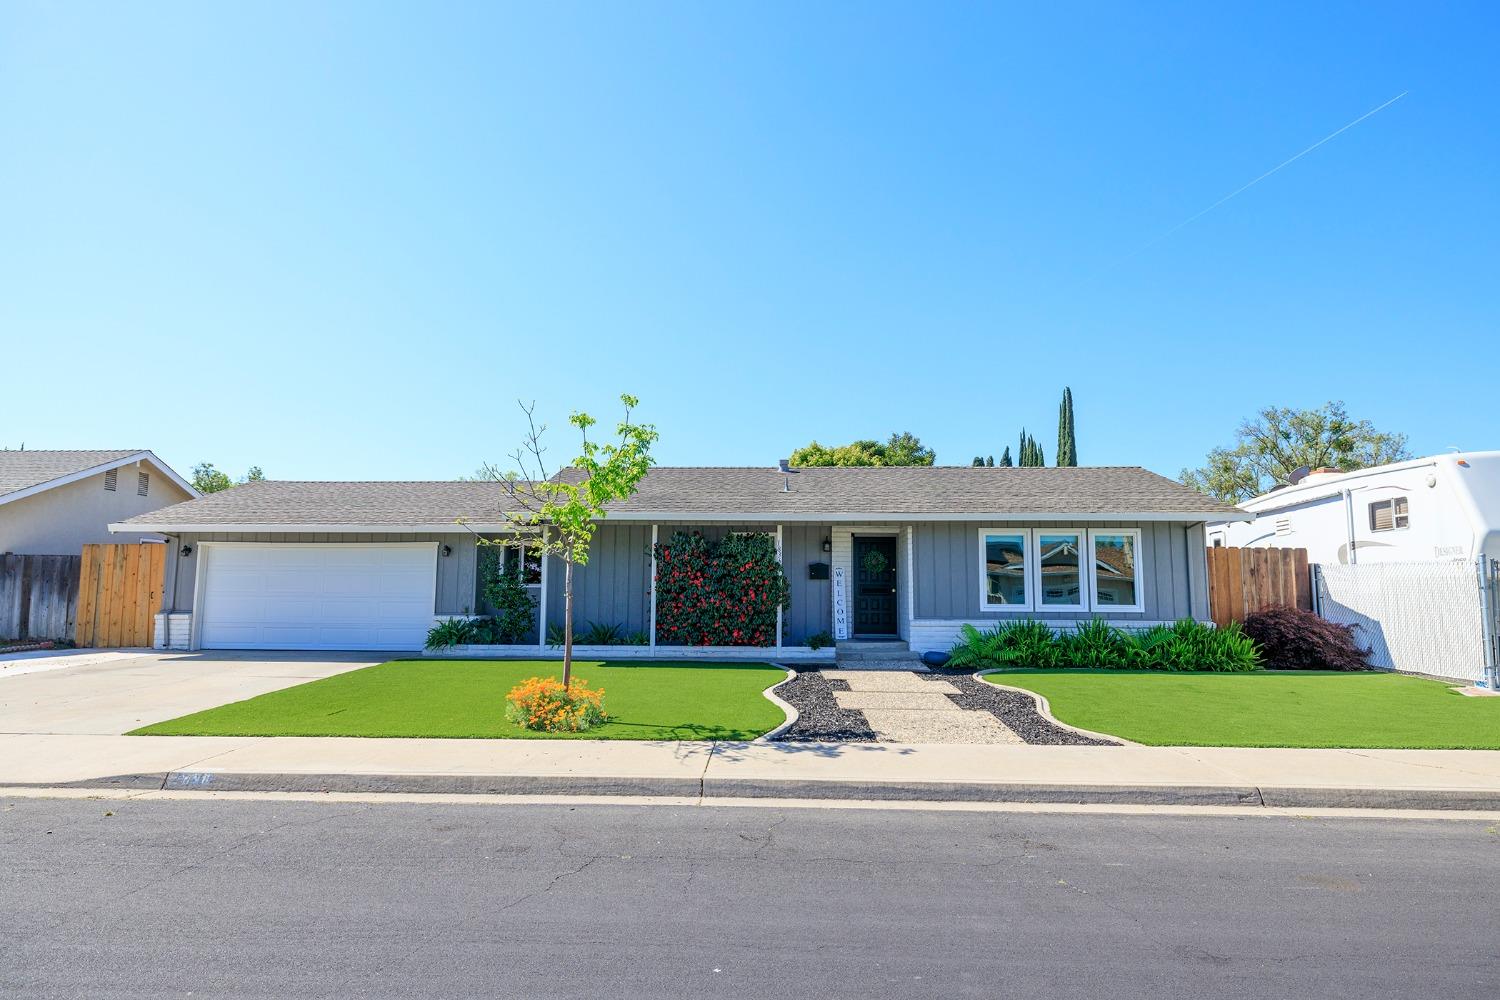 Photo of 1836 Kruger Dr in Modesto, CA